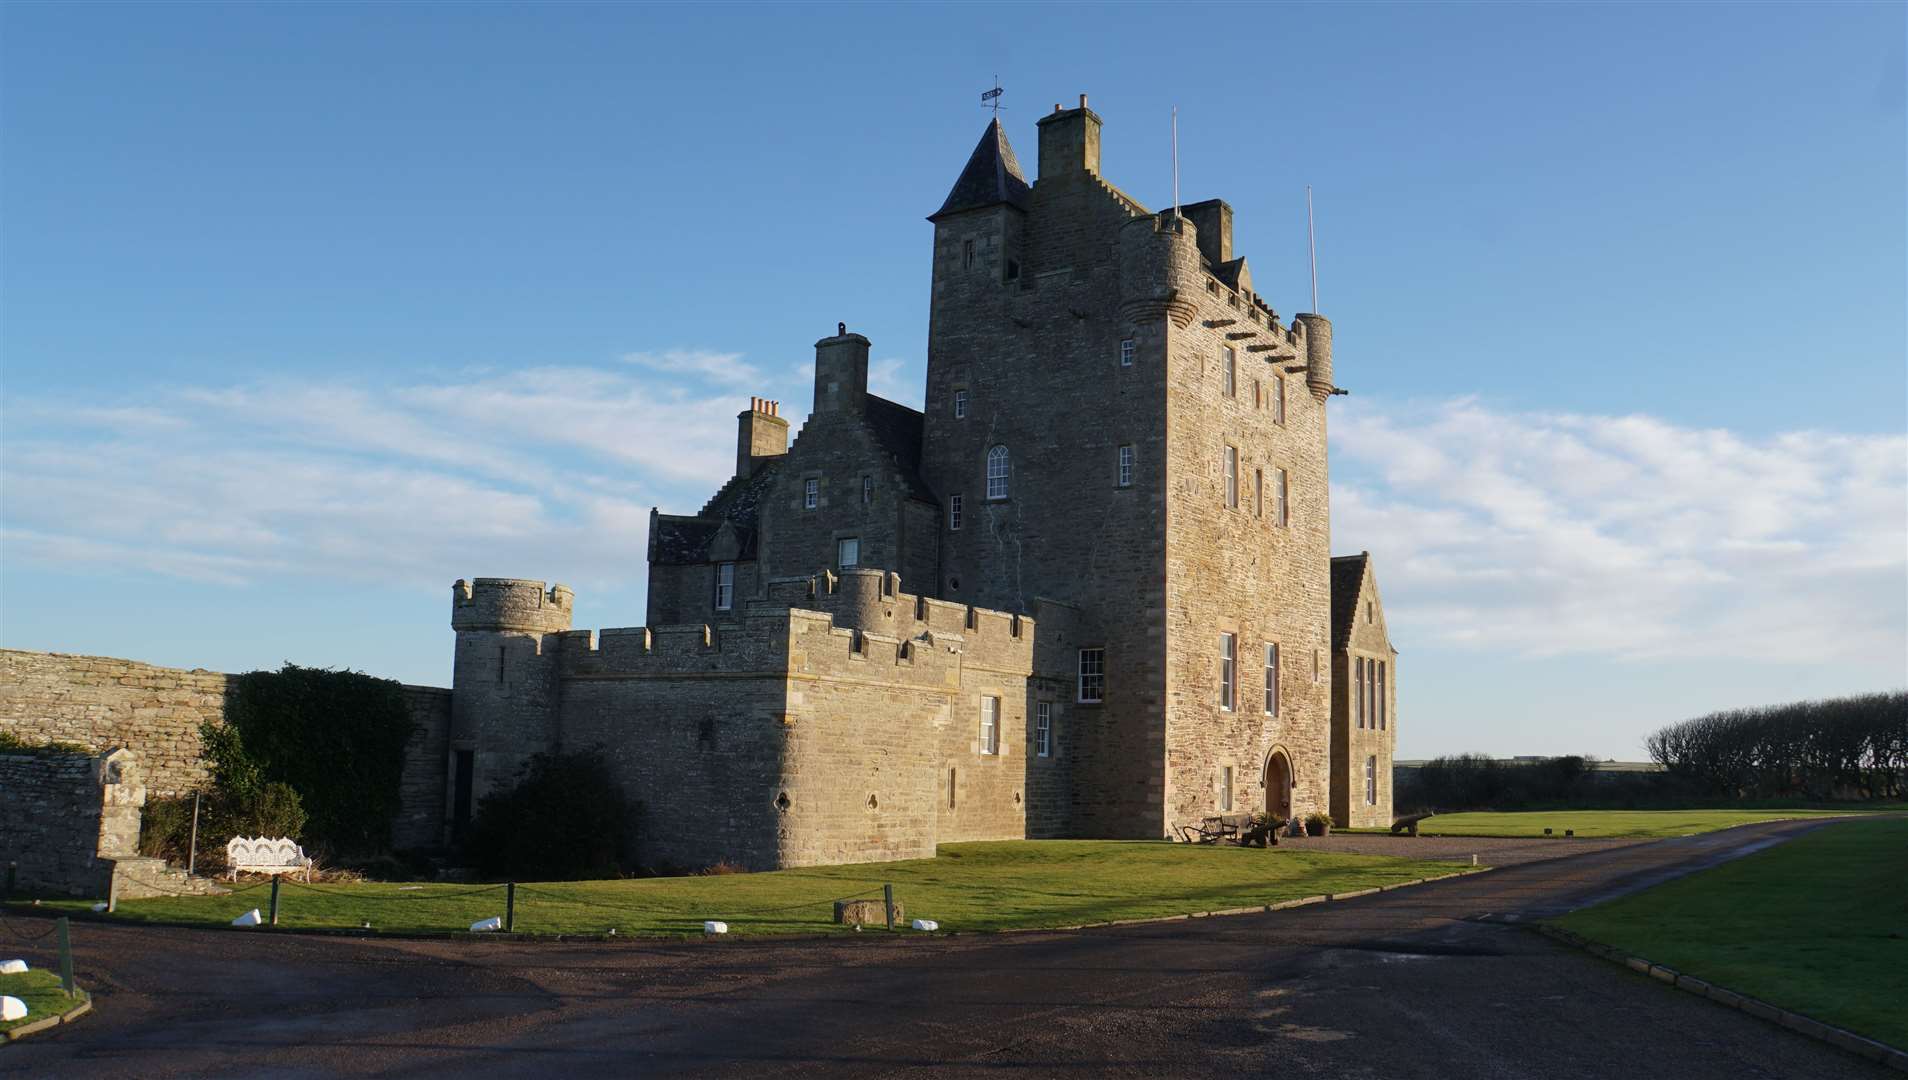 Ackergill Tower is now privately owned. Picture: David G Scott